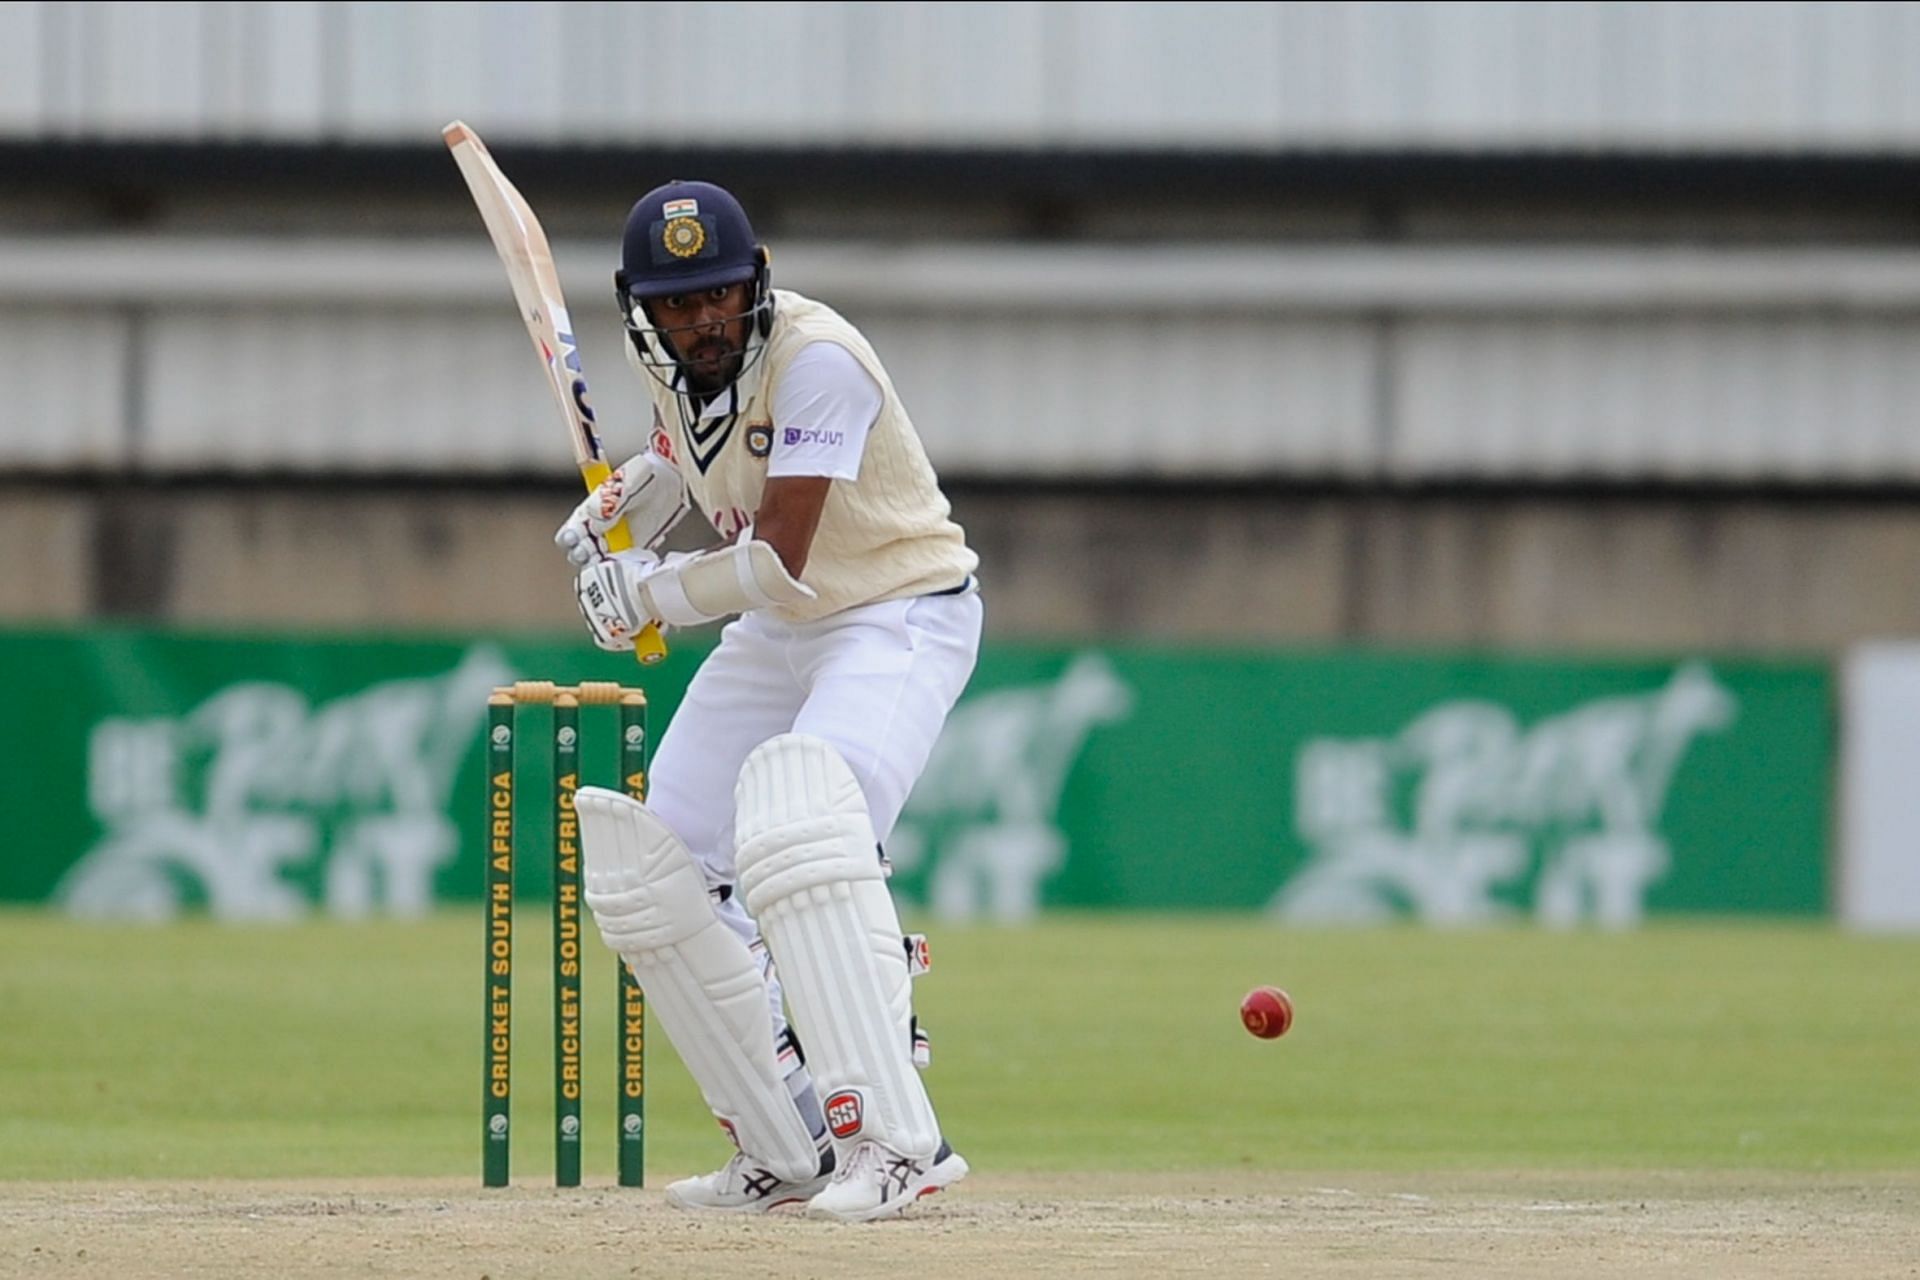 Abhimanyu Easwaran scored 55 off 117 balls in the fourth innings chase of the second Test before rain played spoilsport